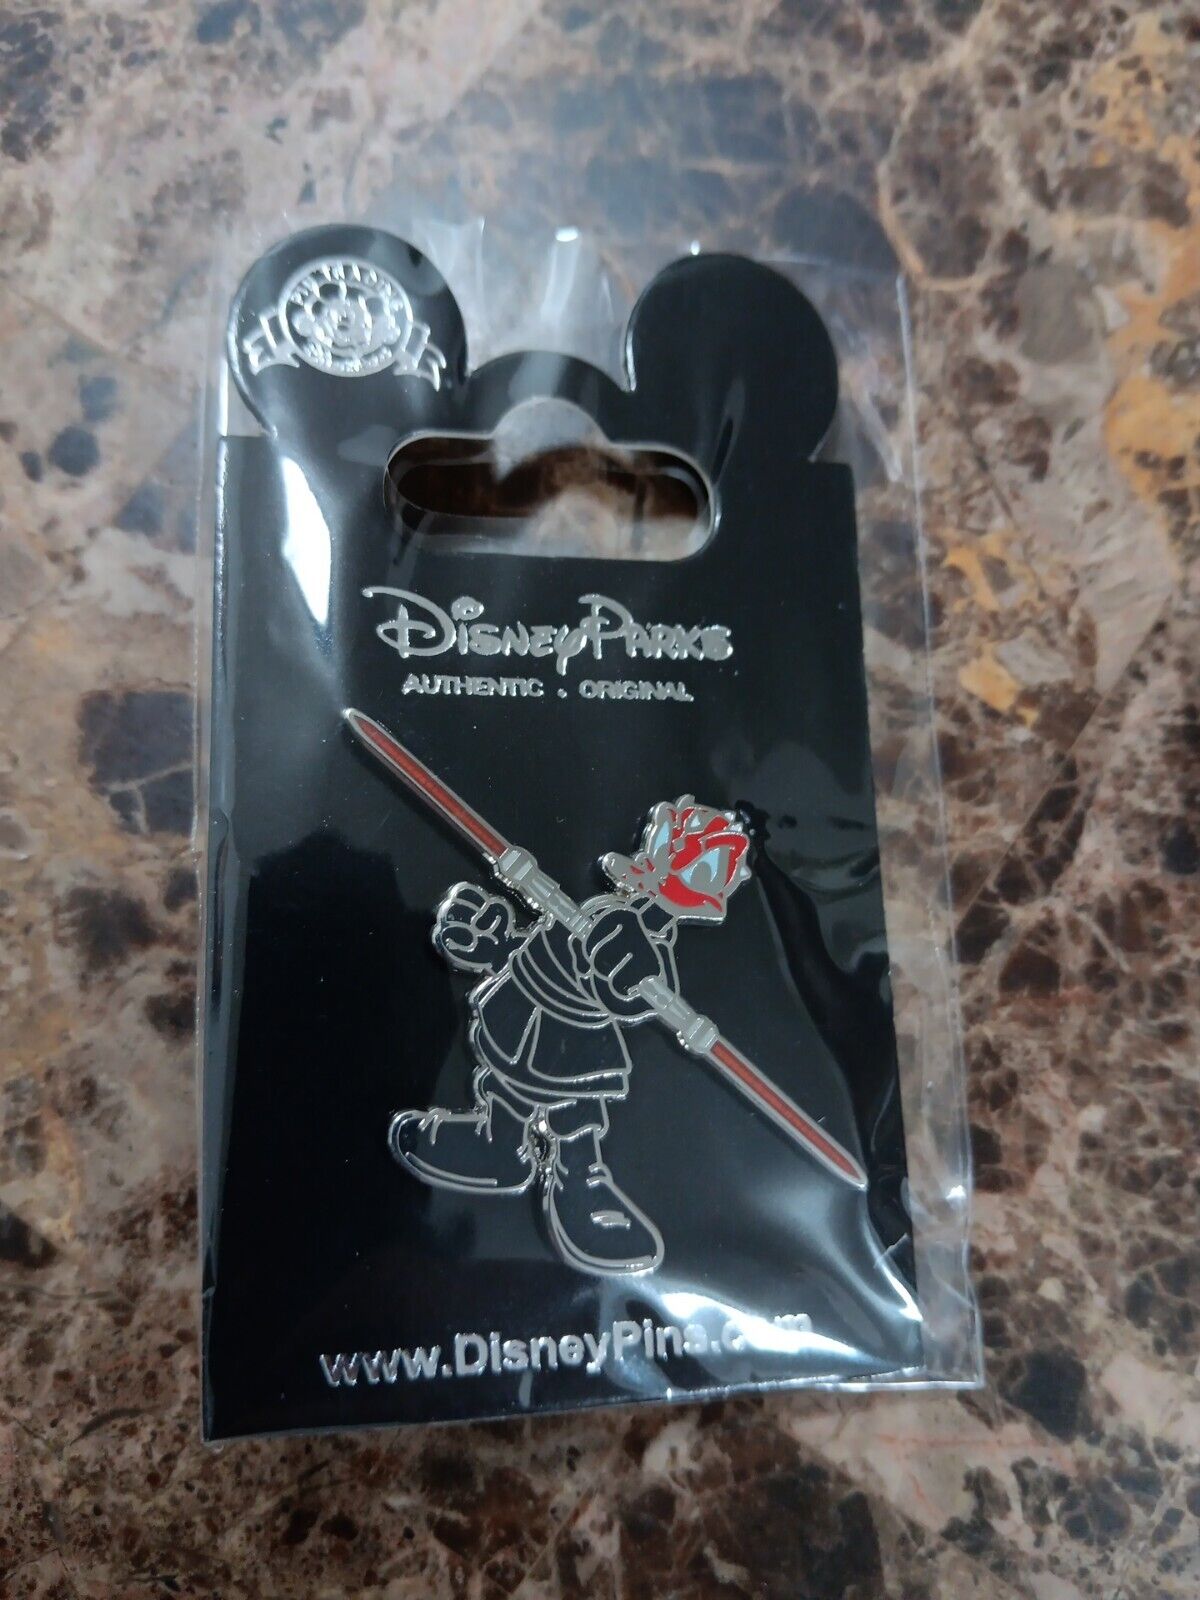 DISNEY STAR WARS MYSTERY PIN DONALD DUCK AS SITH DARTH MAUL WITH LIGHTSABER